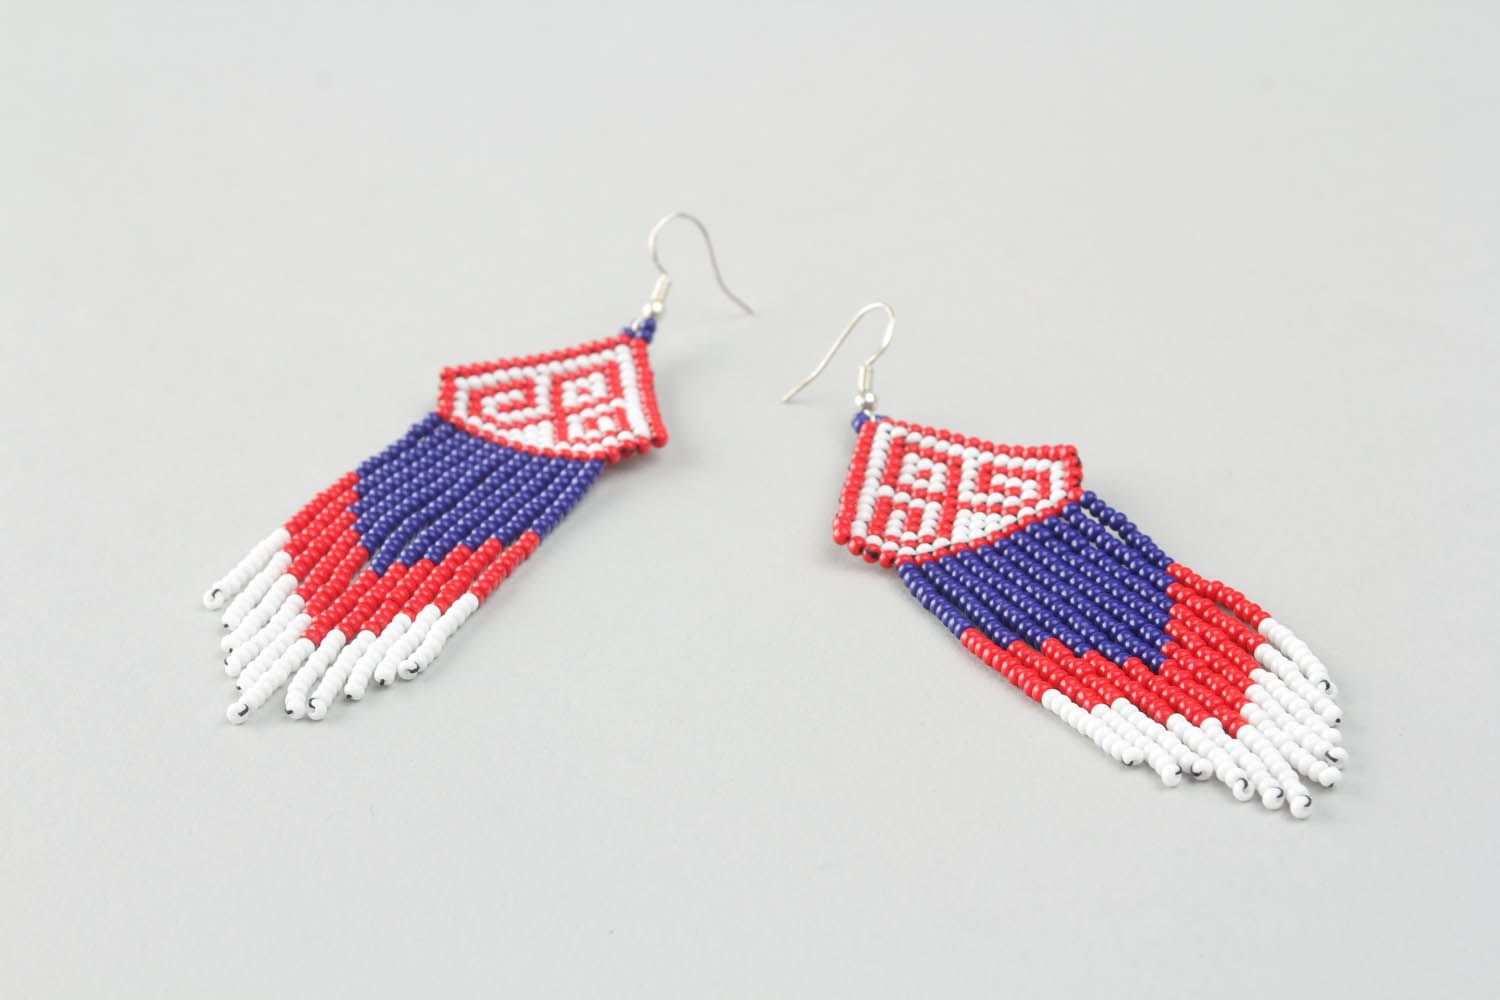 Beaded earrings with ornament photo 5